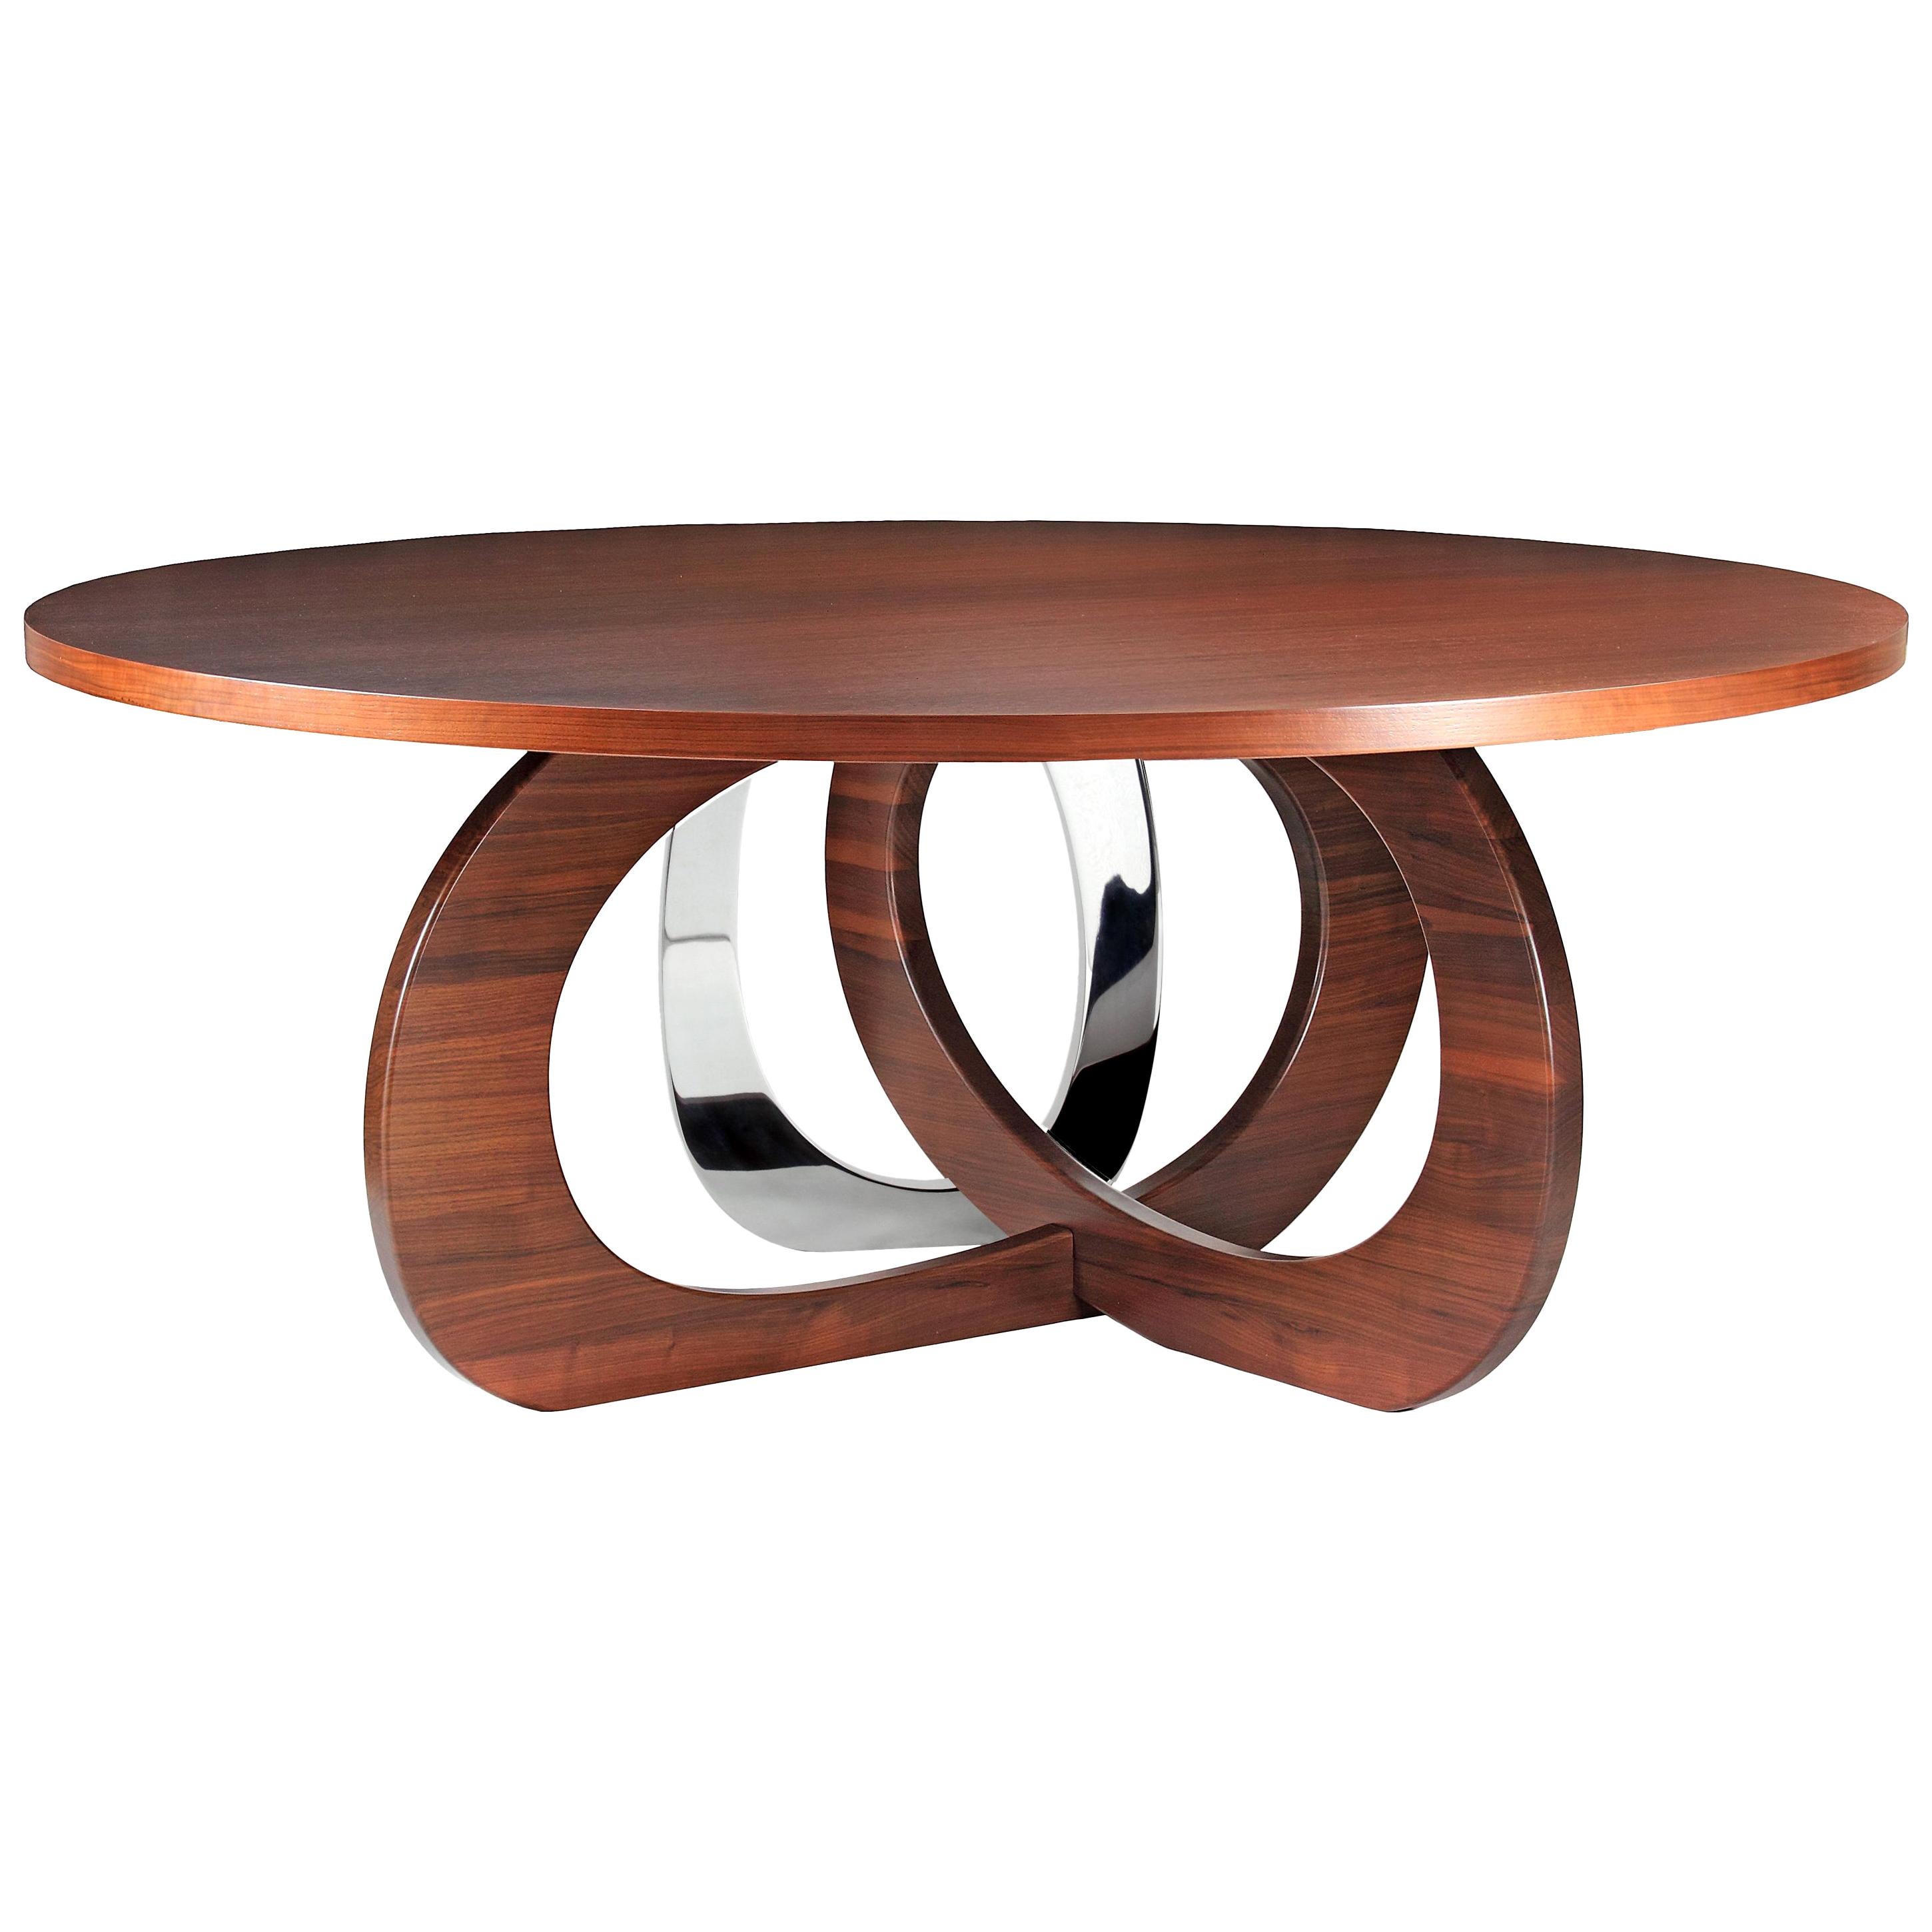 Dining Table Circular Shape Wood Mirror Steel Collectible Design Italy